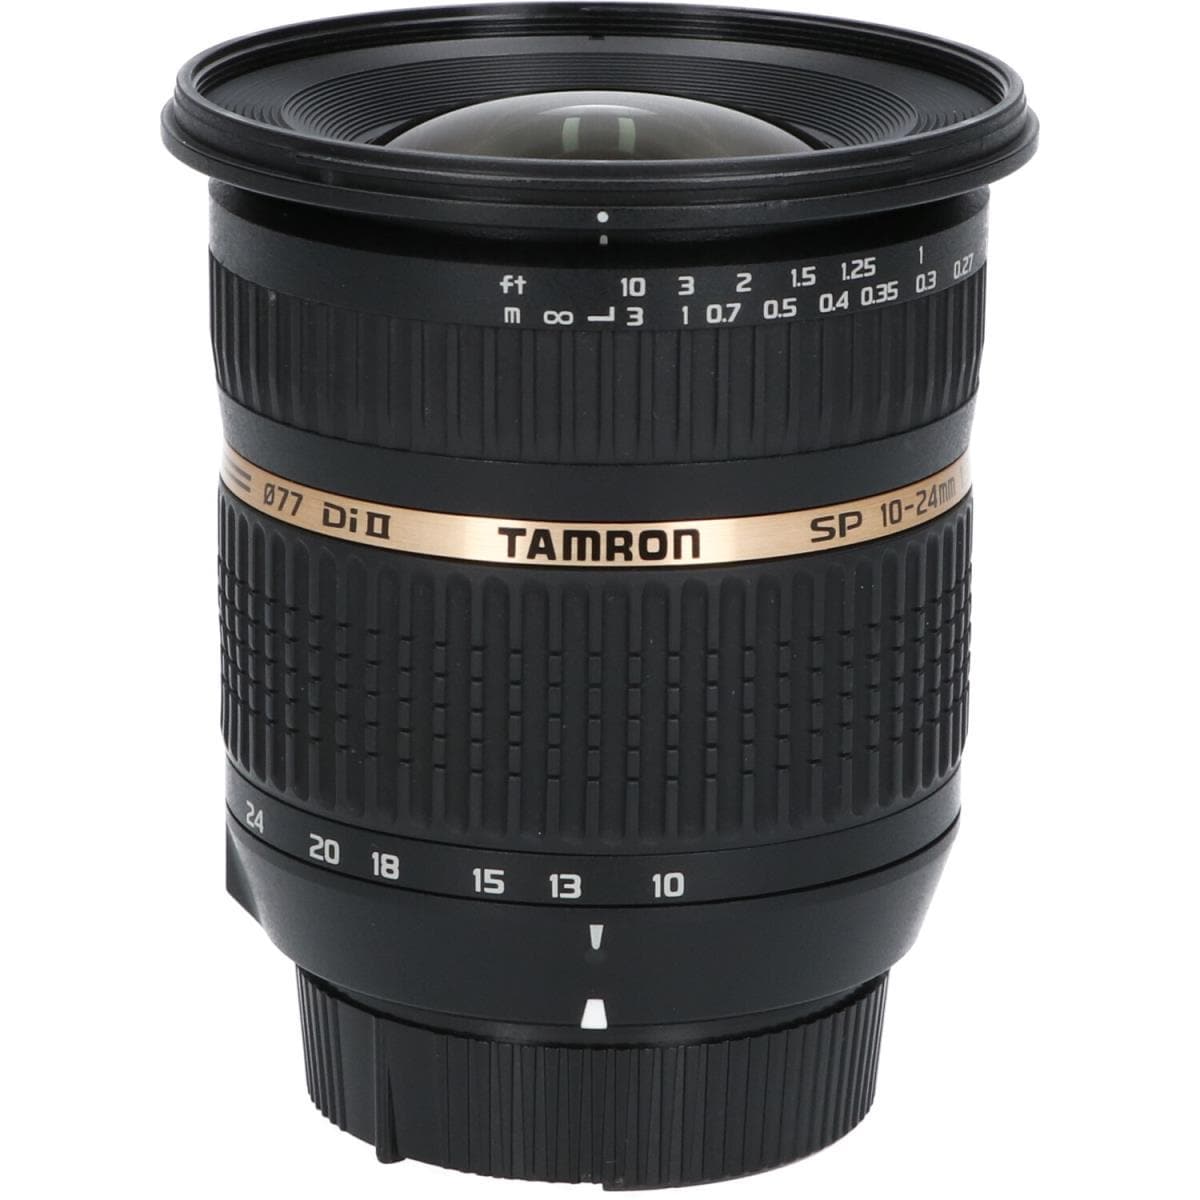 TAMRON ニコン10?24mm F3．5?4．5DIII B001